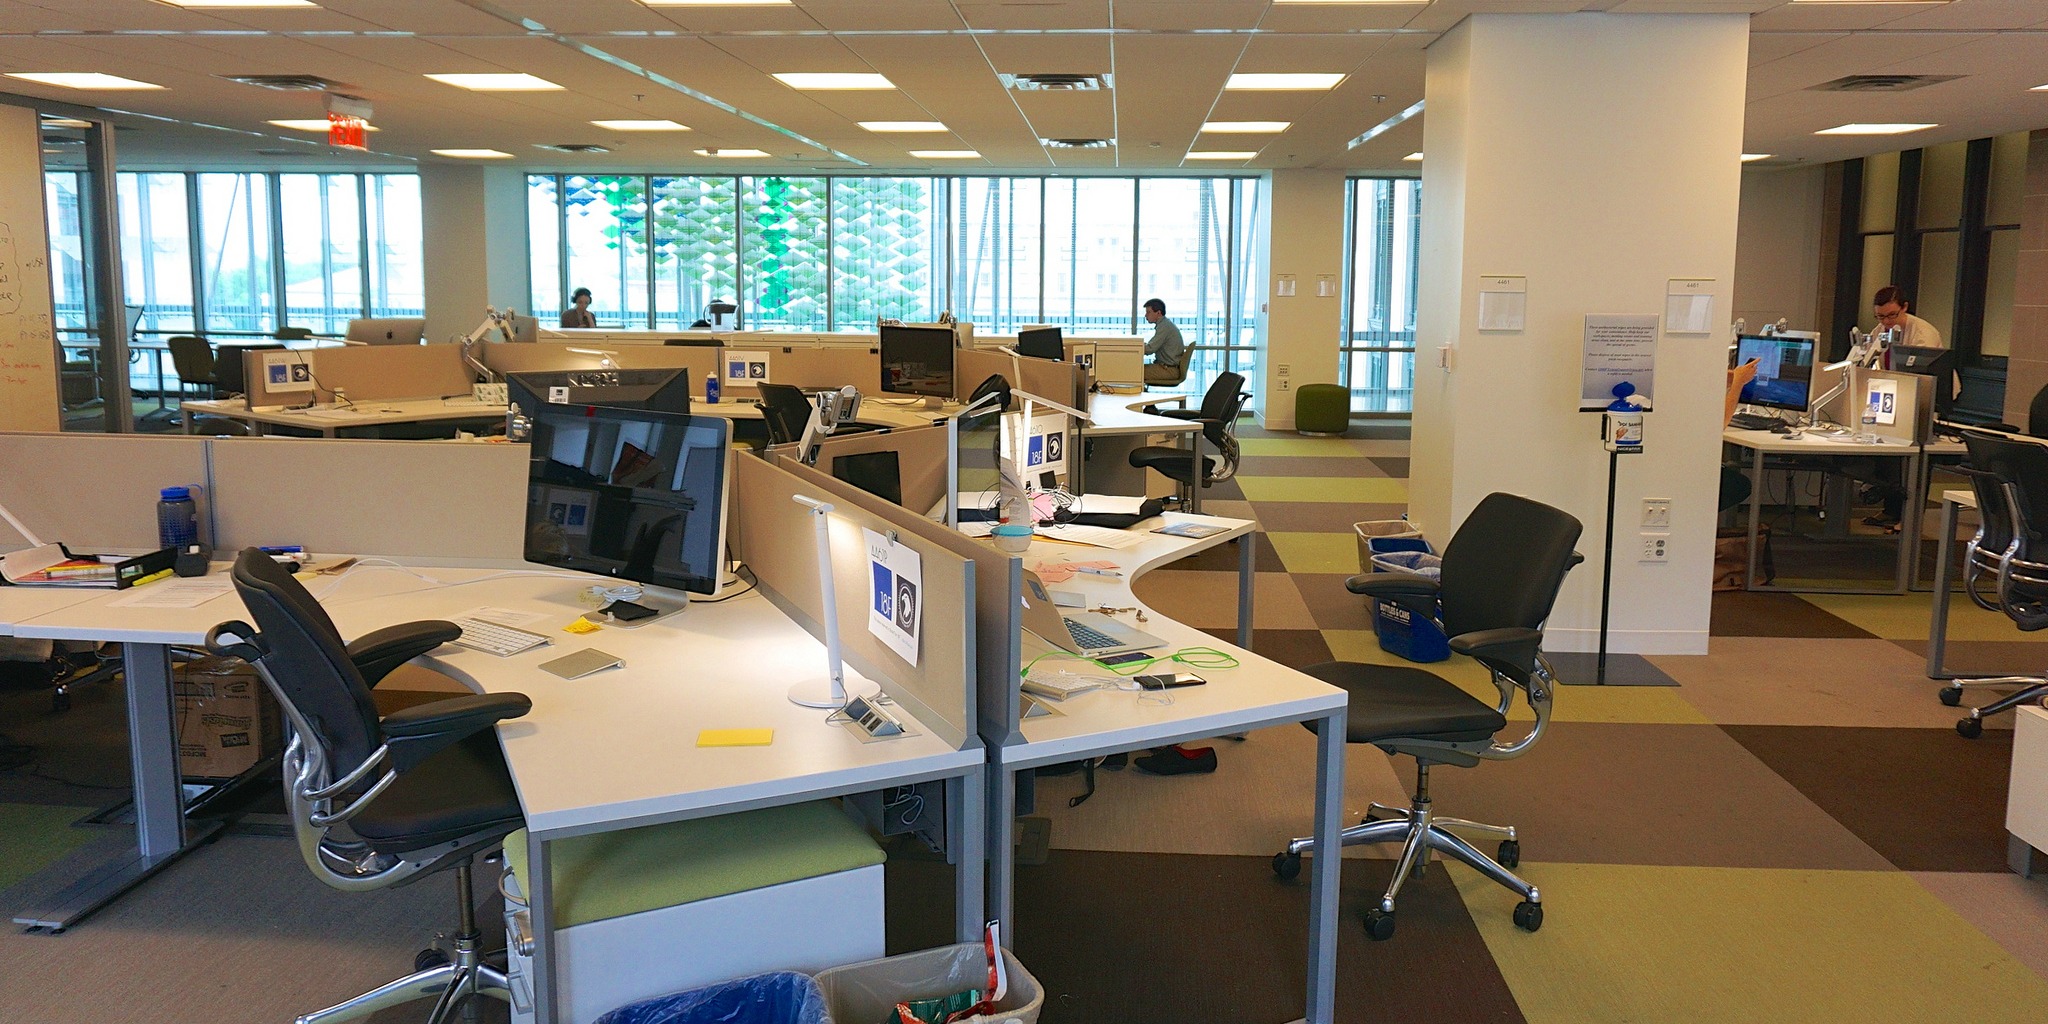 Serviced Office (Image by Ted Eytan [CC BY 2.0] via Flickr